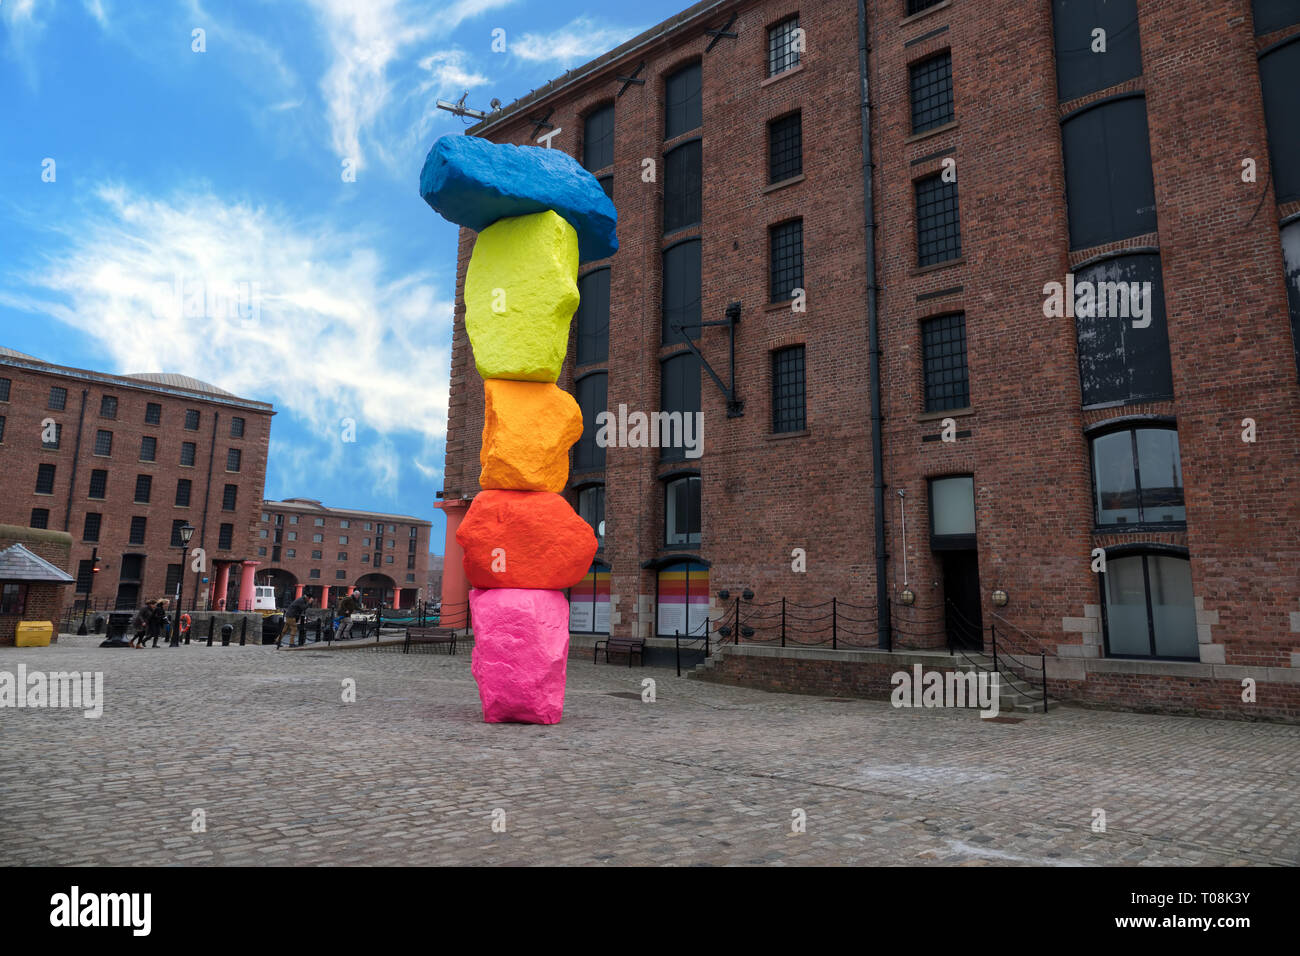 'Liverpool Mountain' by Swiss artist Ugo Rondinone’s 10-metre high sculpture stands in Mermaid Courtyard at Liverpool's Royal Albert Dock. Stock Photo